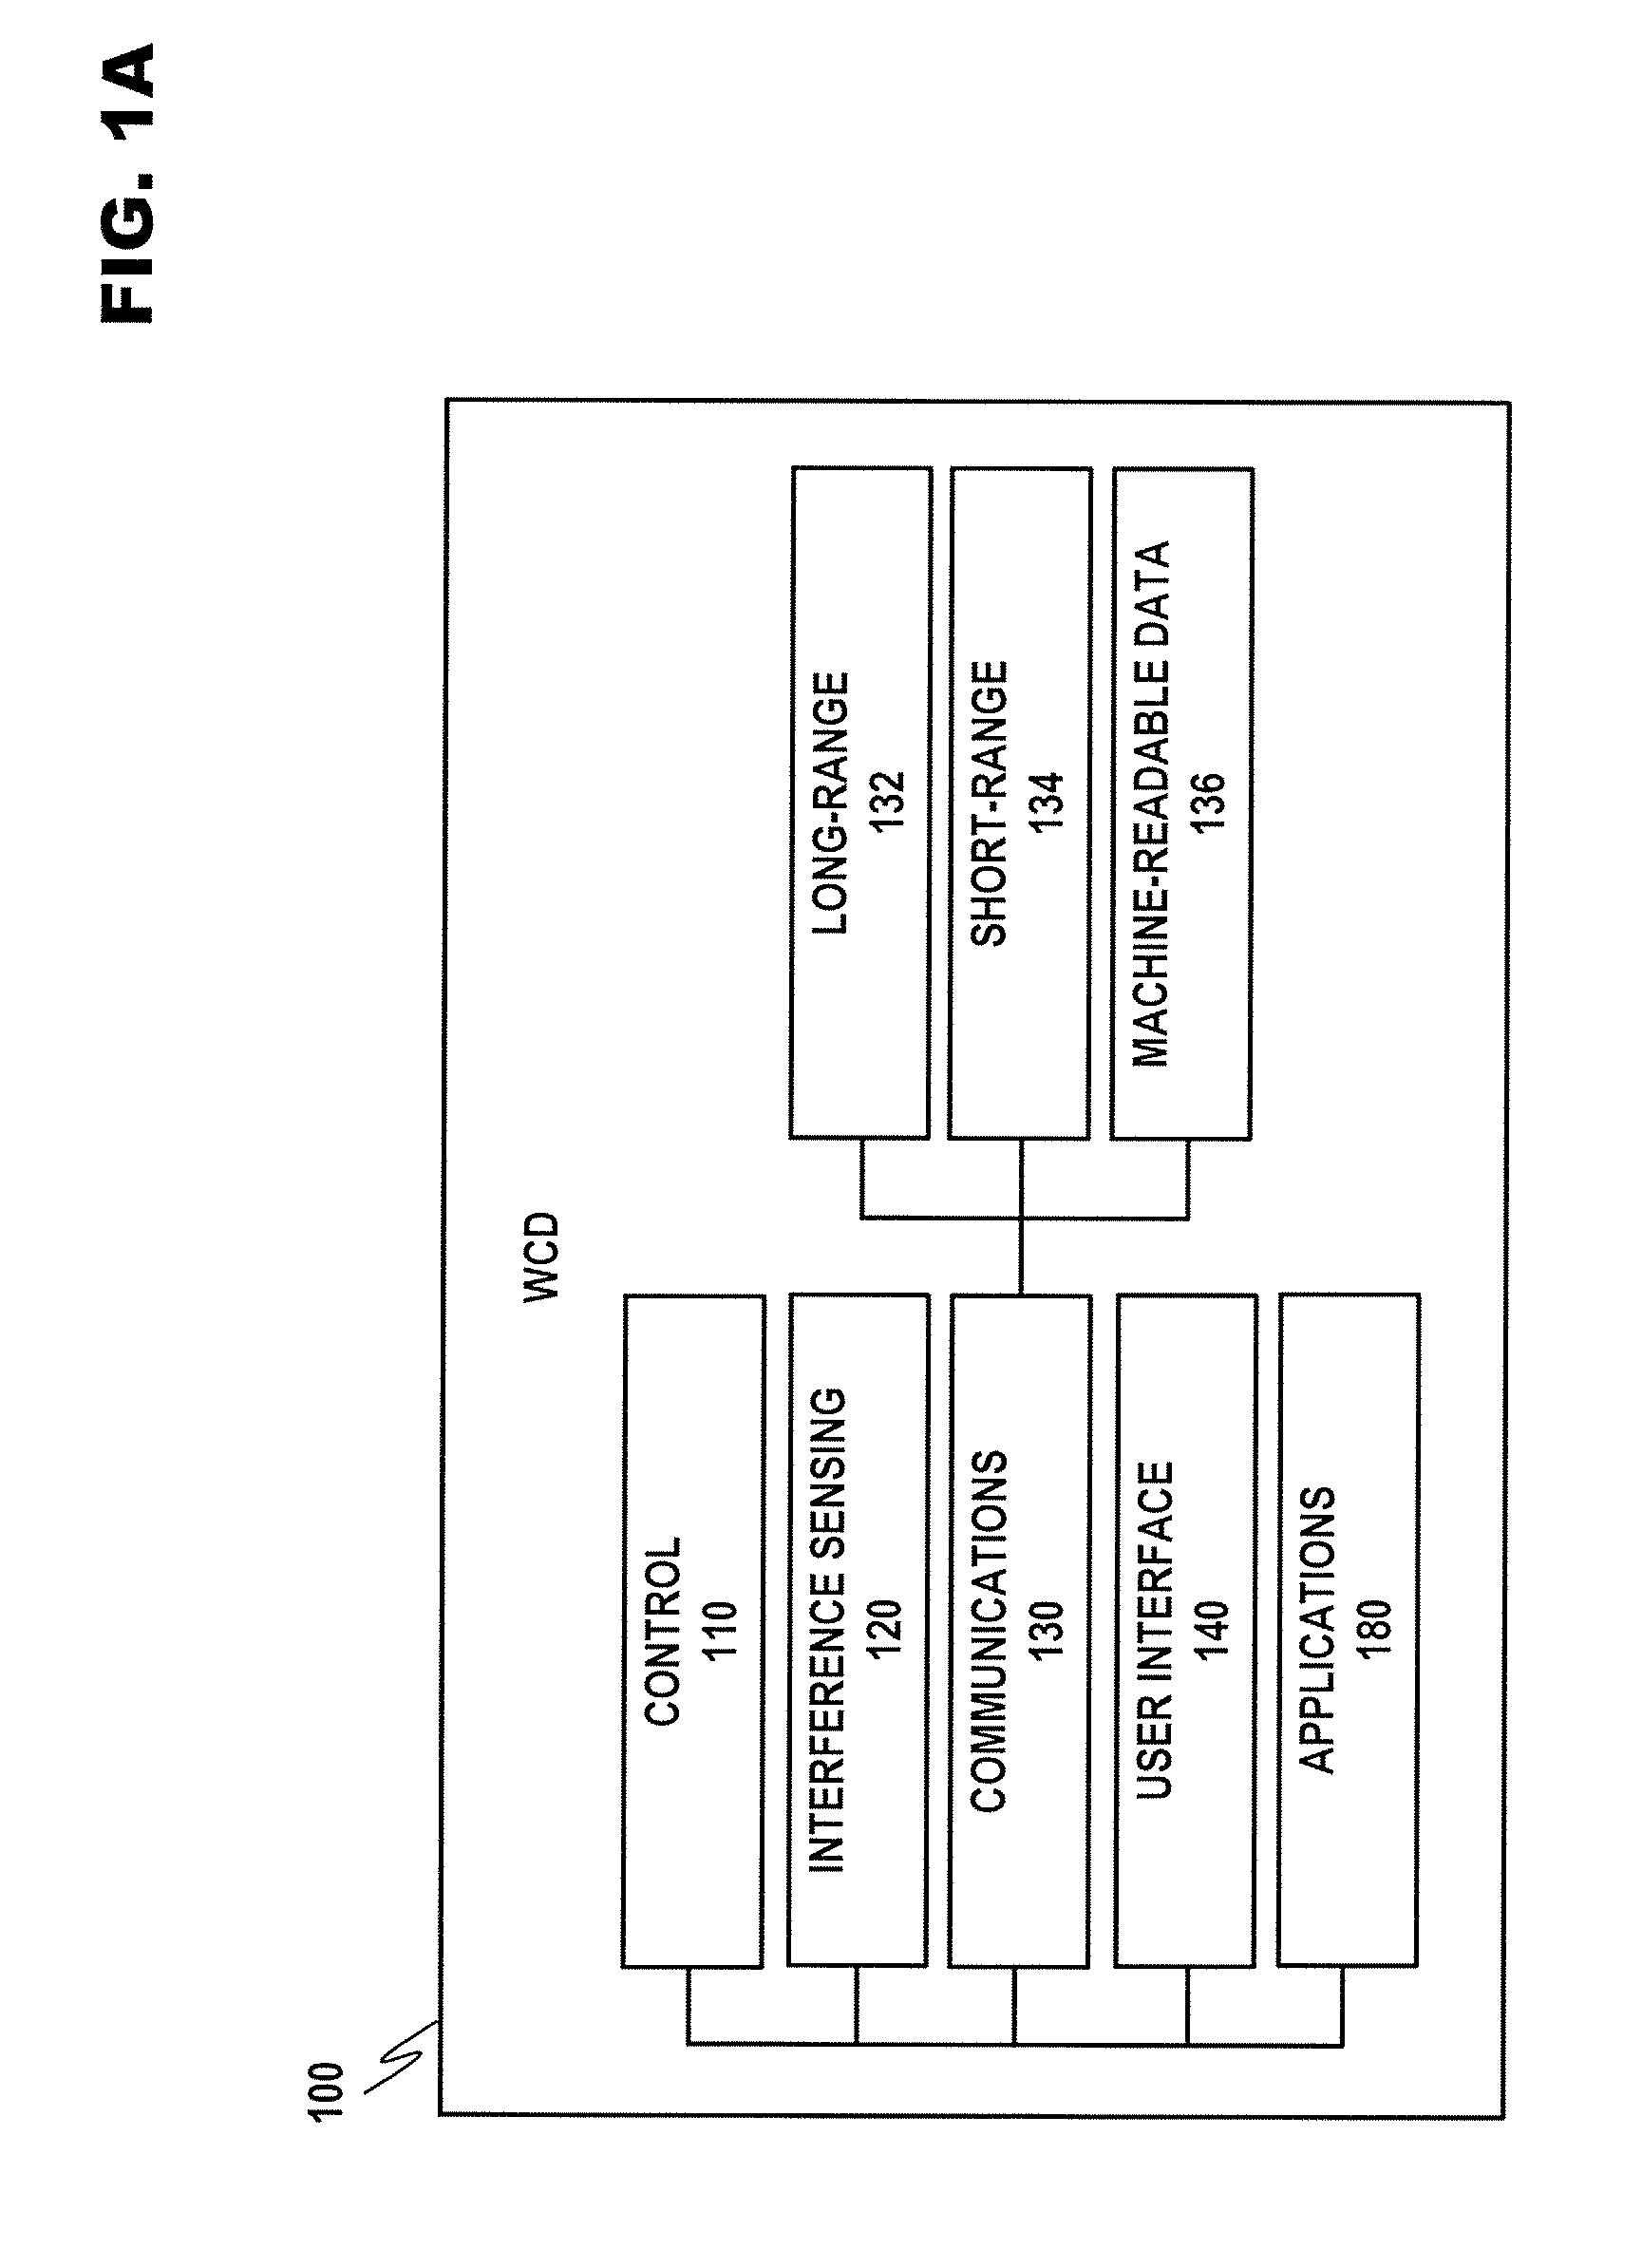 Method and apparatus for propagating encryption keys between wireless communication devices